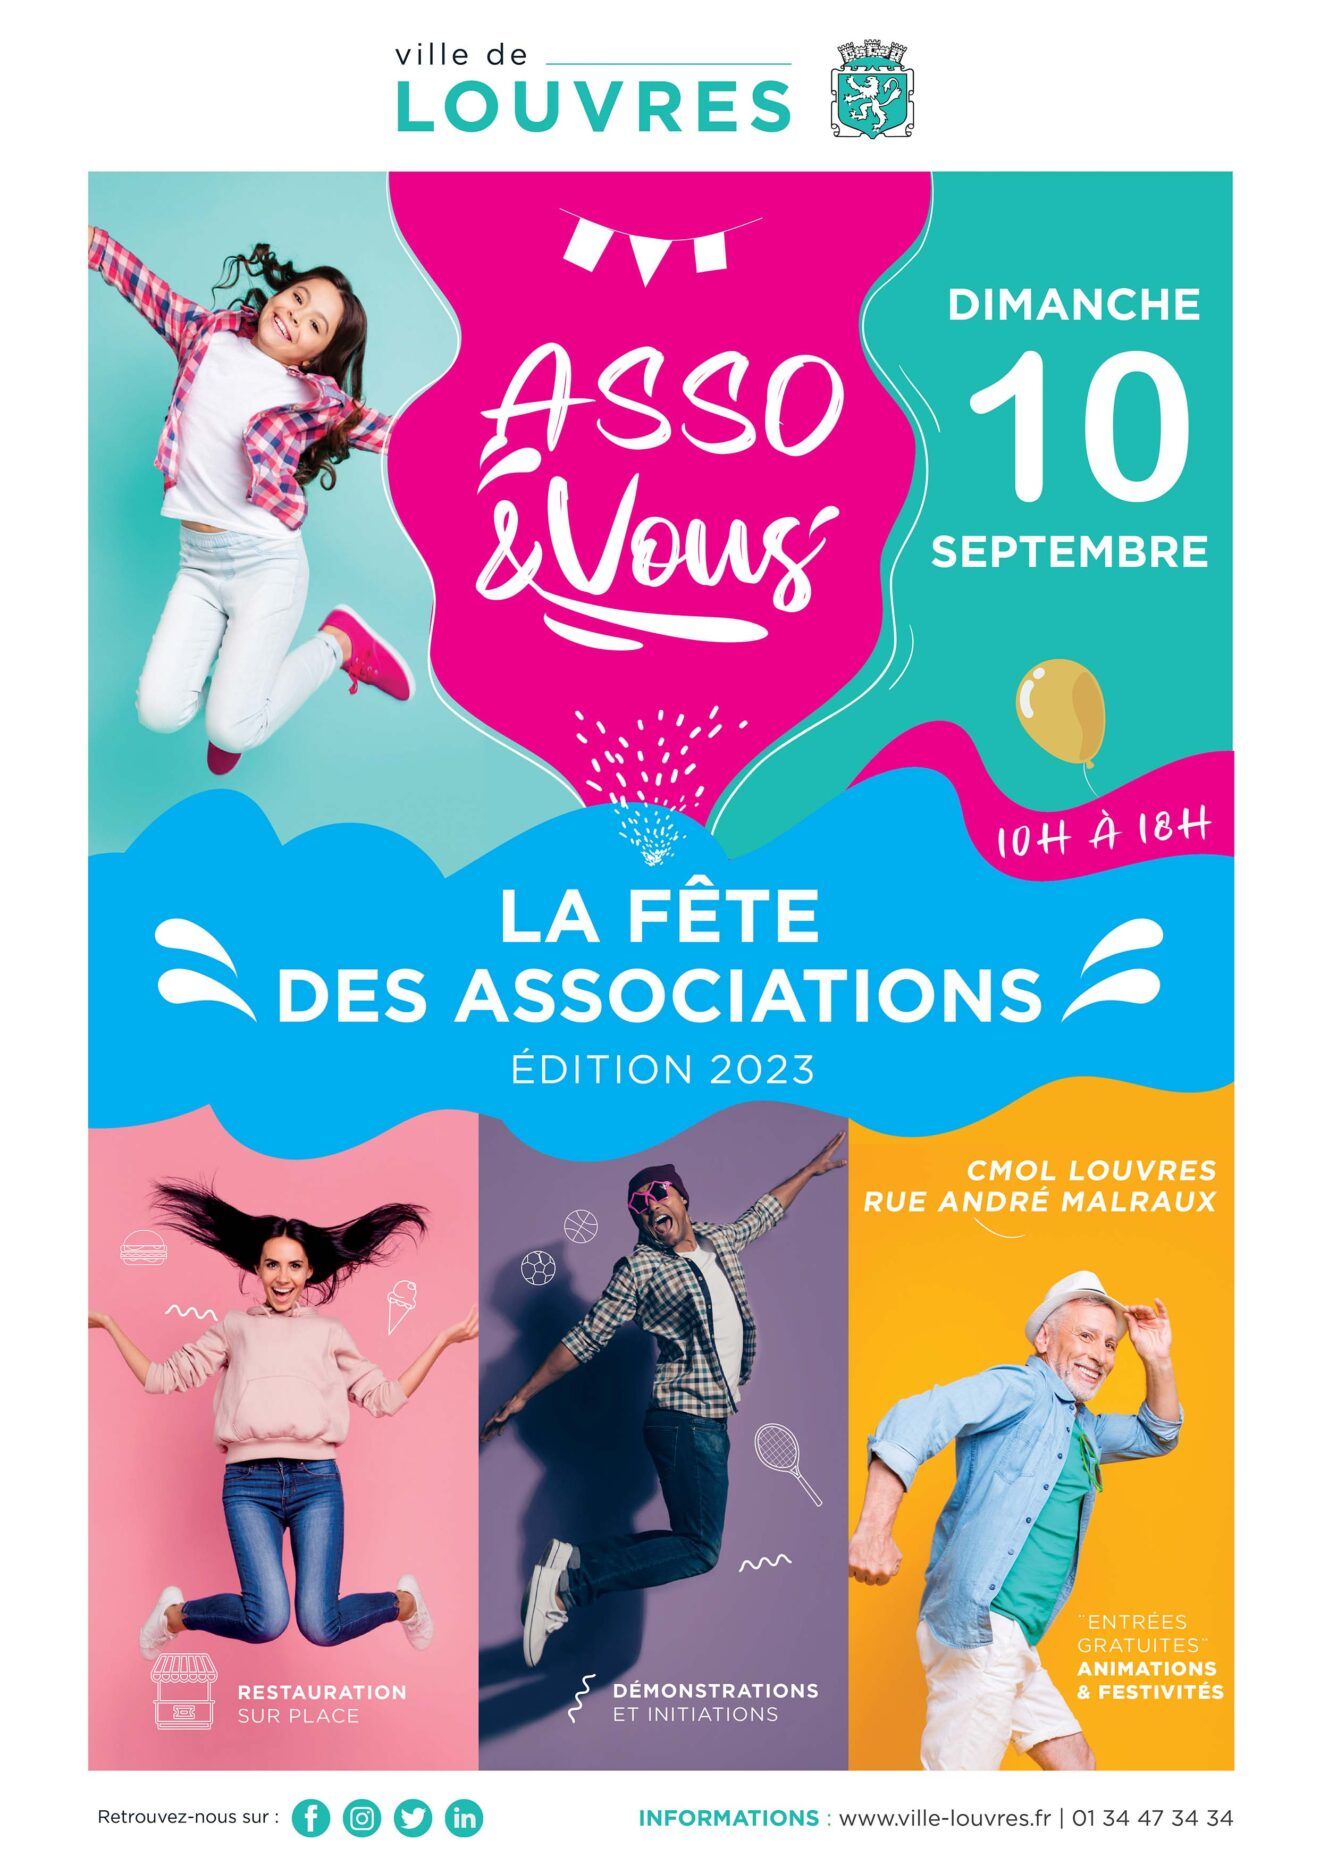 Asso & Vous newsletter